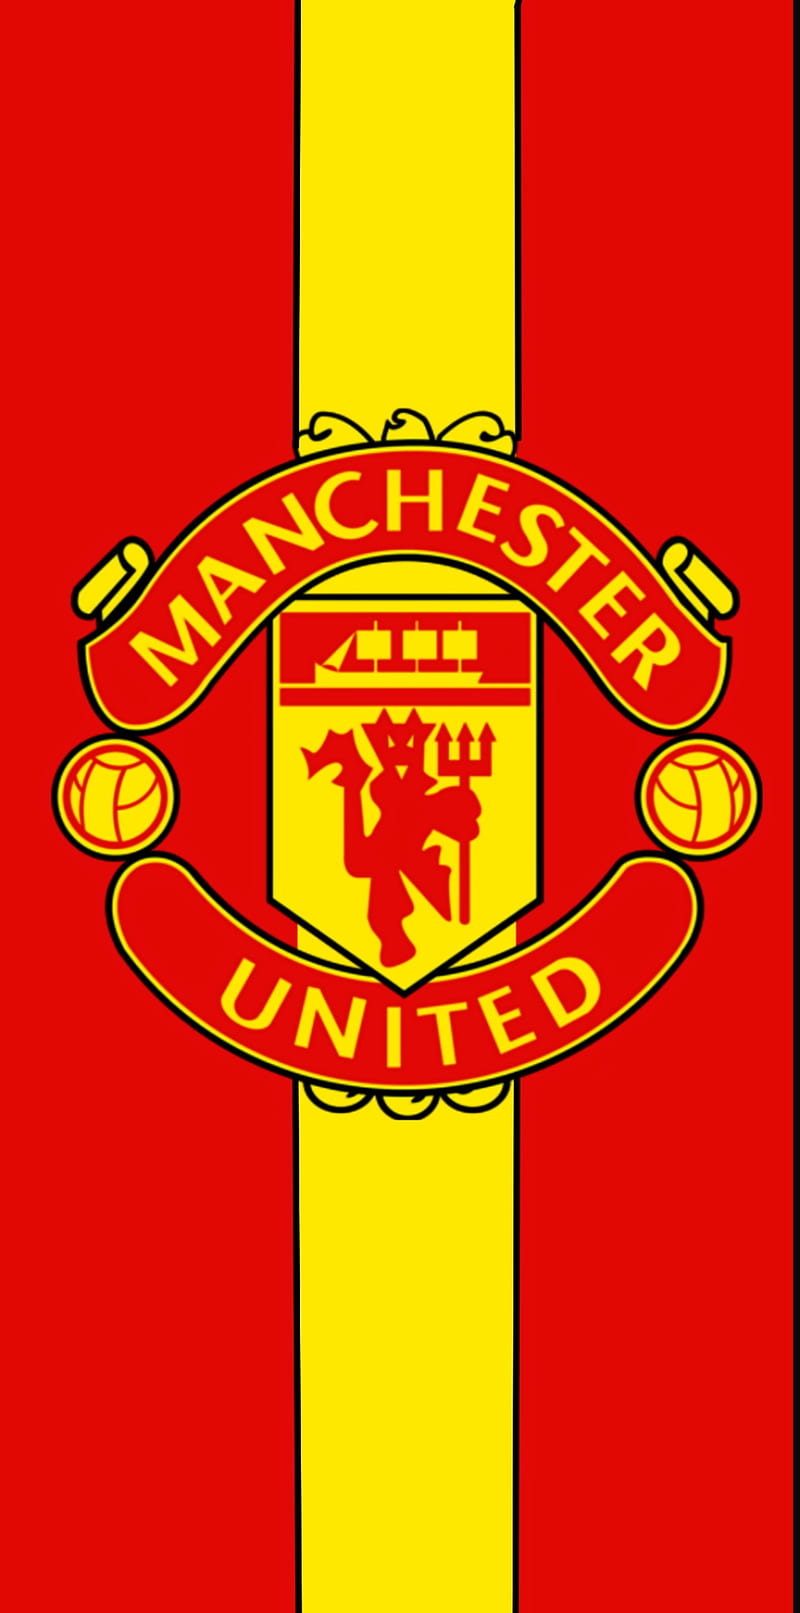 Manchester United Man United Red Red Devils Red Devils Cr7 Hd Phone Wallpaper Peakpx